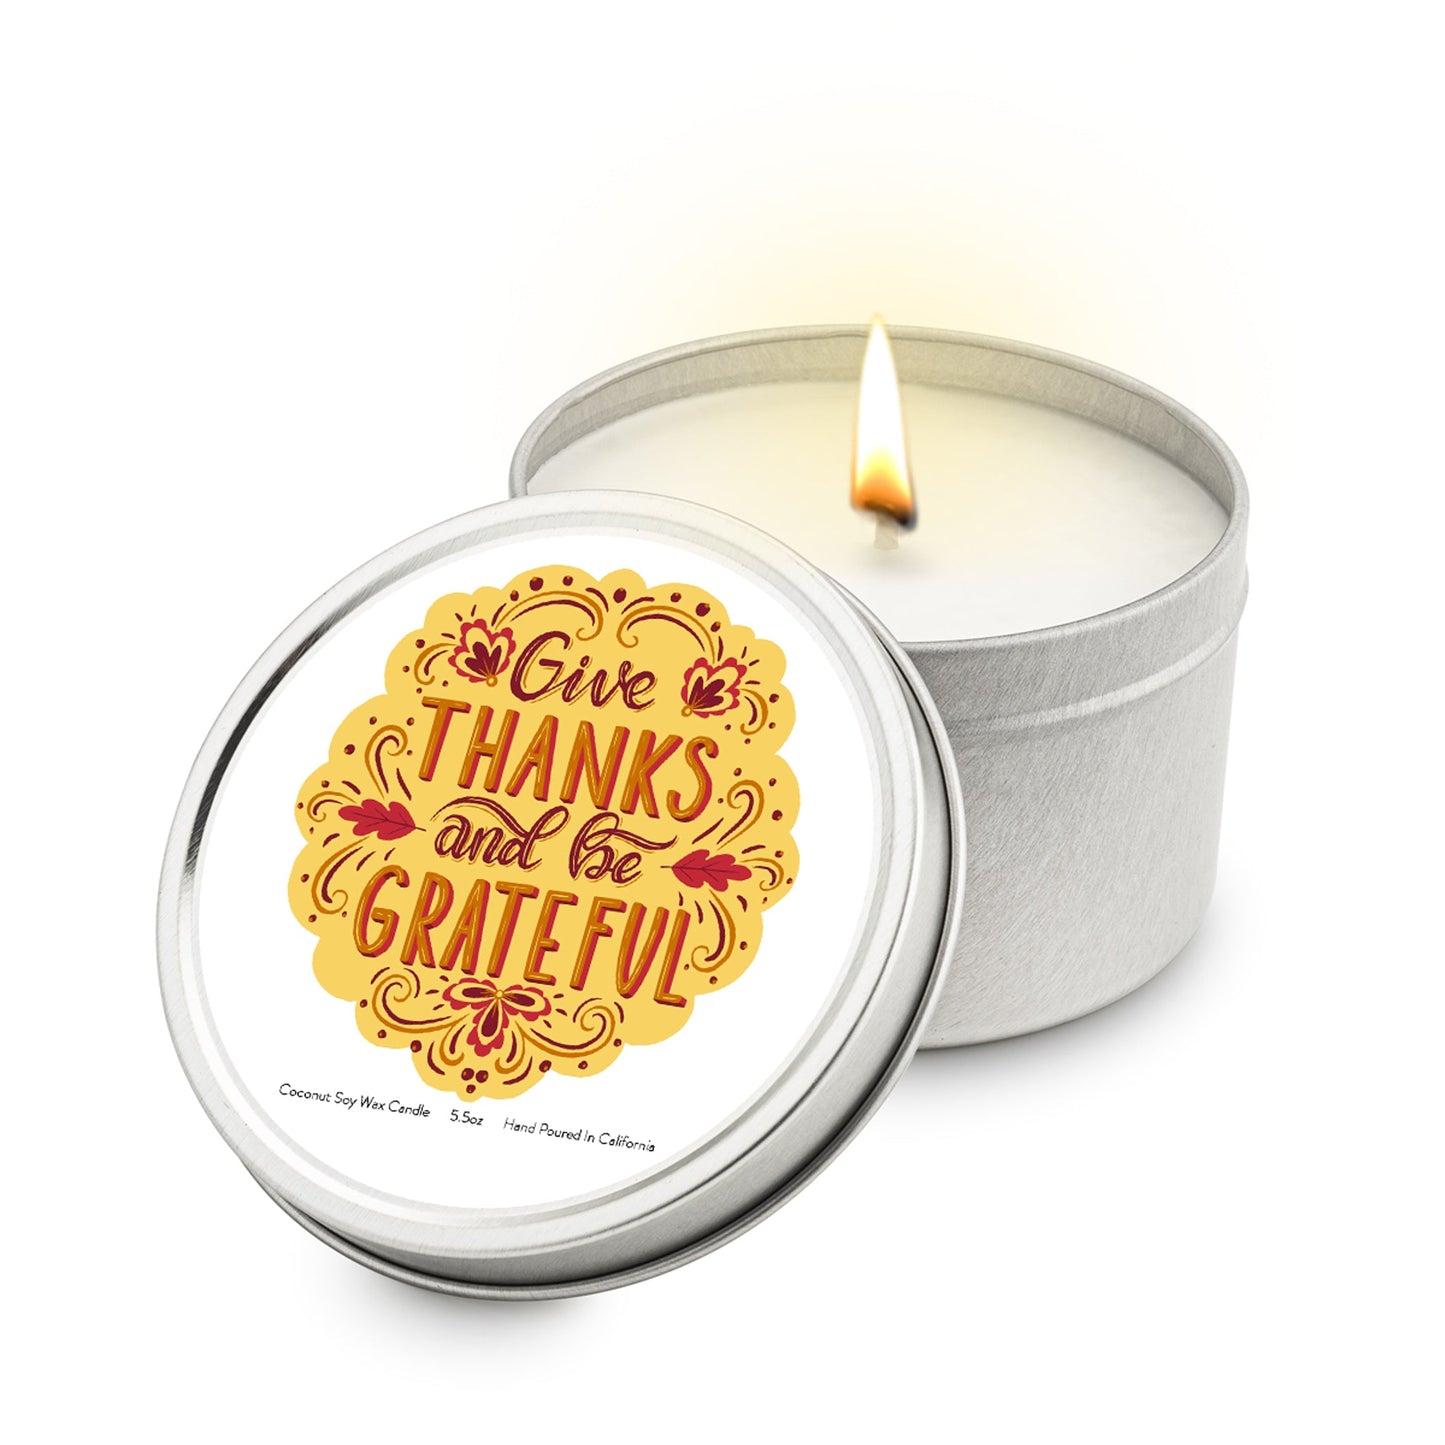 Give Thanks and Be Grateful 5.5 oz Soy Blend Travel Candle Tin